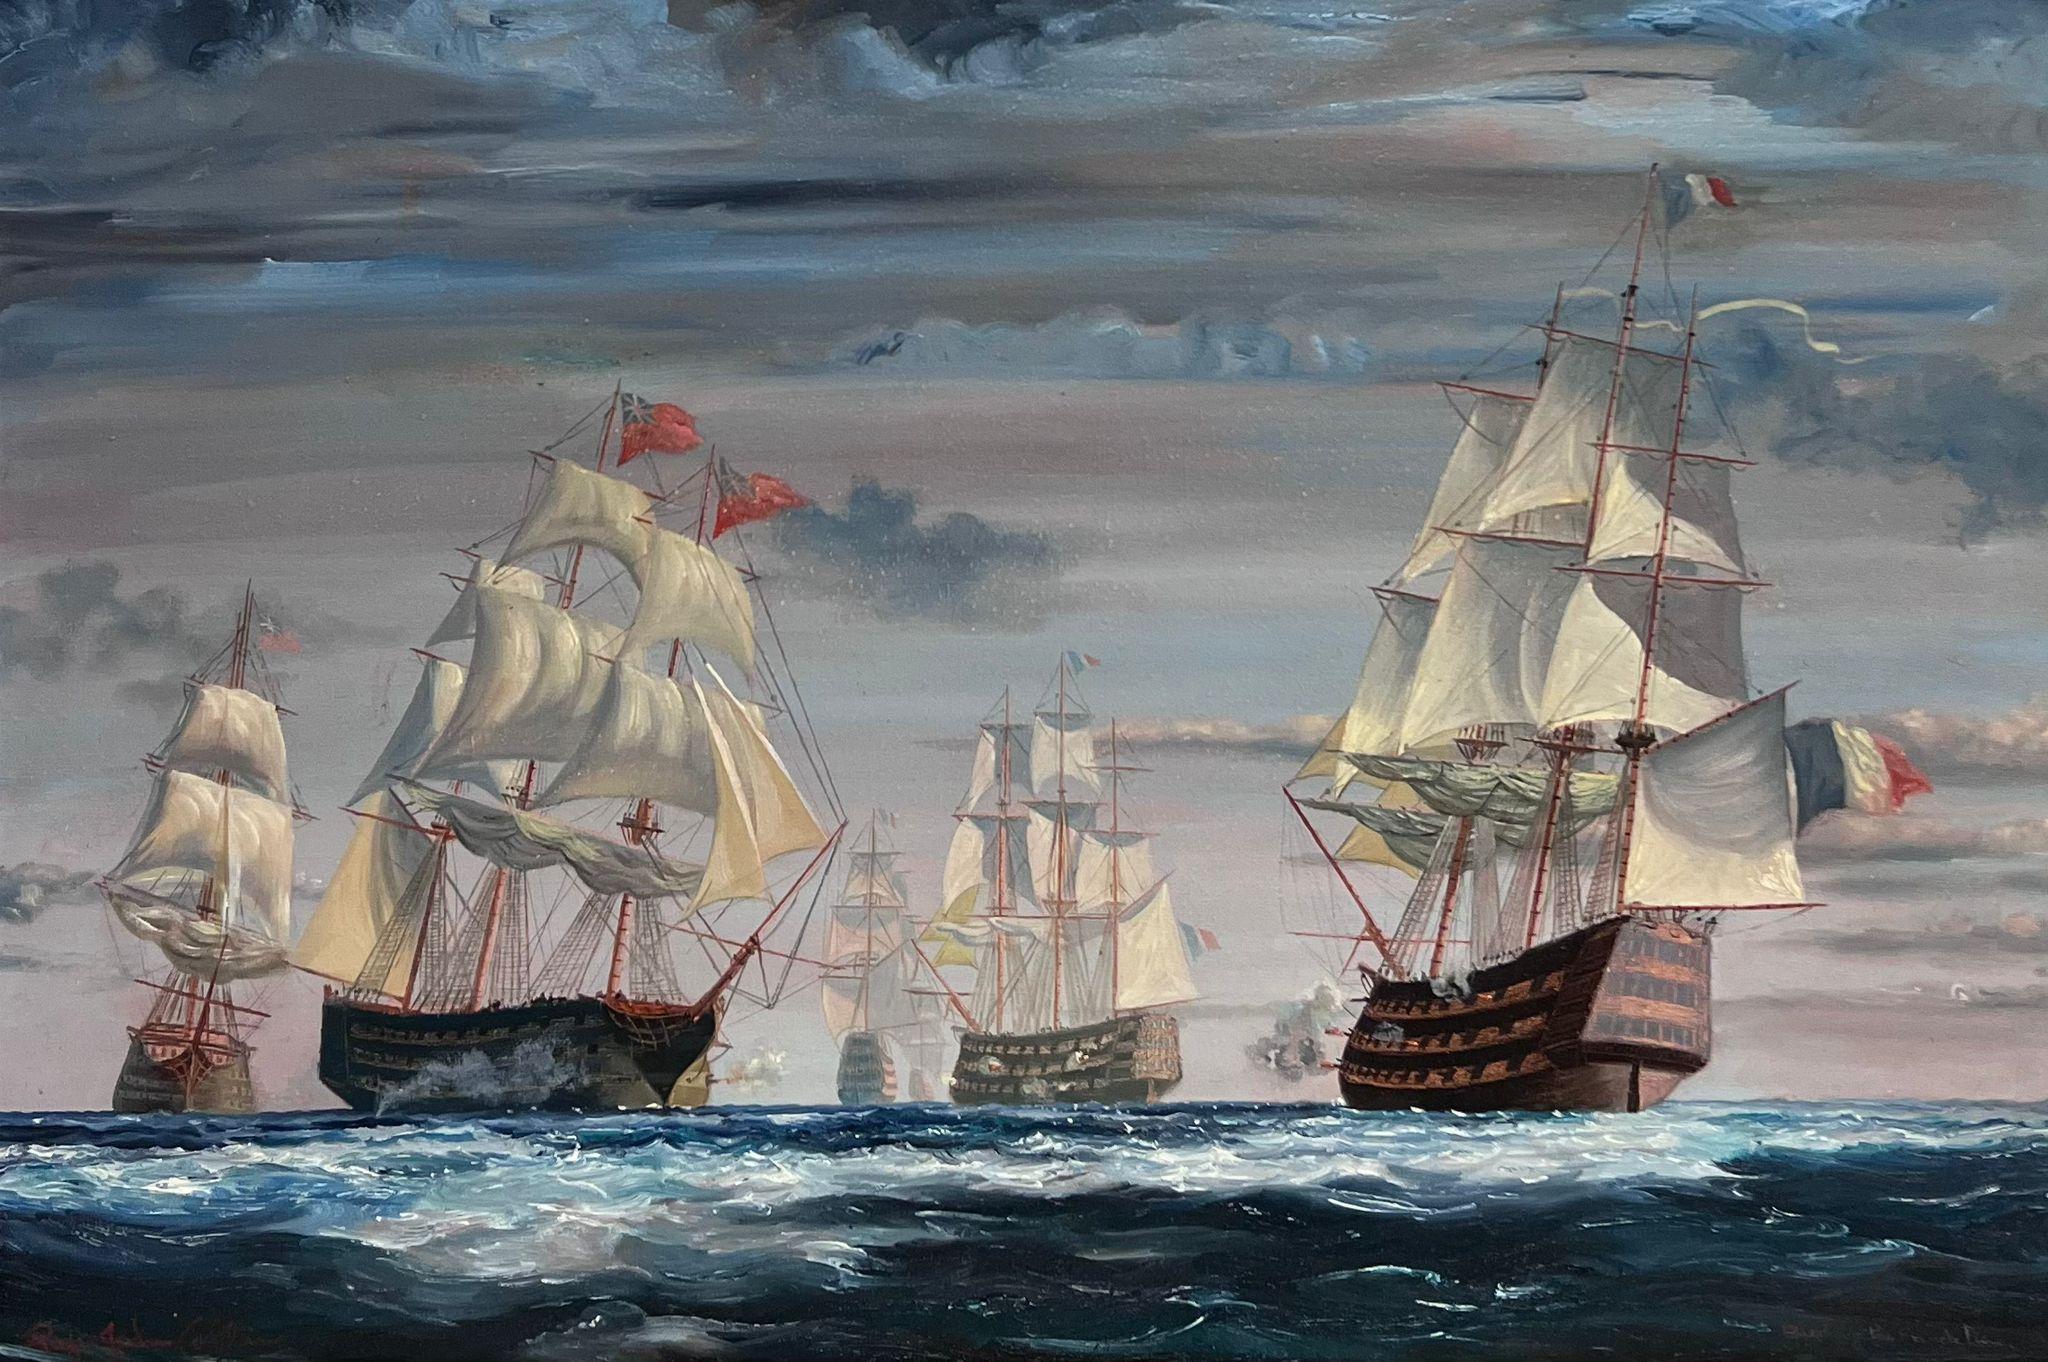 Large British Maritime Naval Battle Engagement at Sea 18th Century Classic Ships - Painting by Roger John Collins